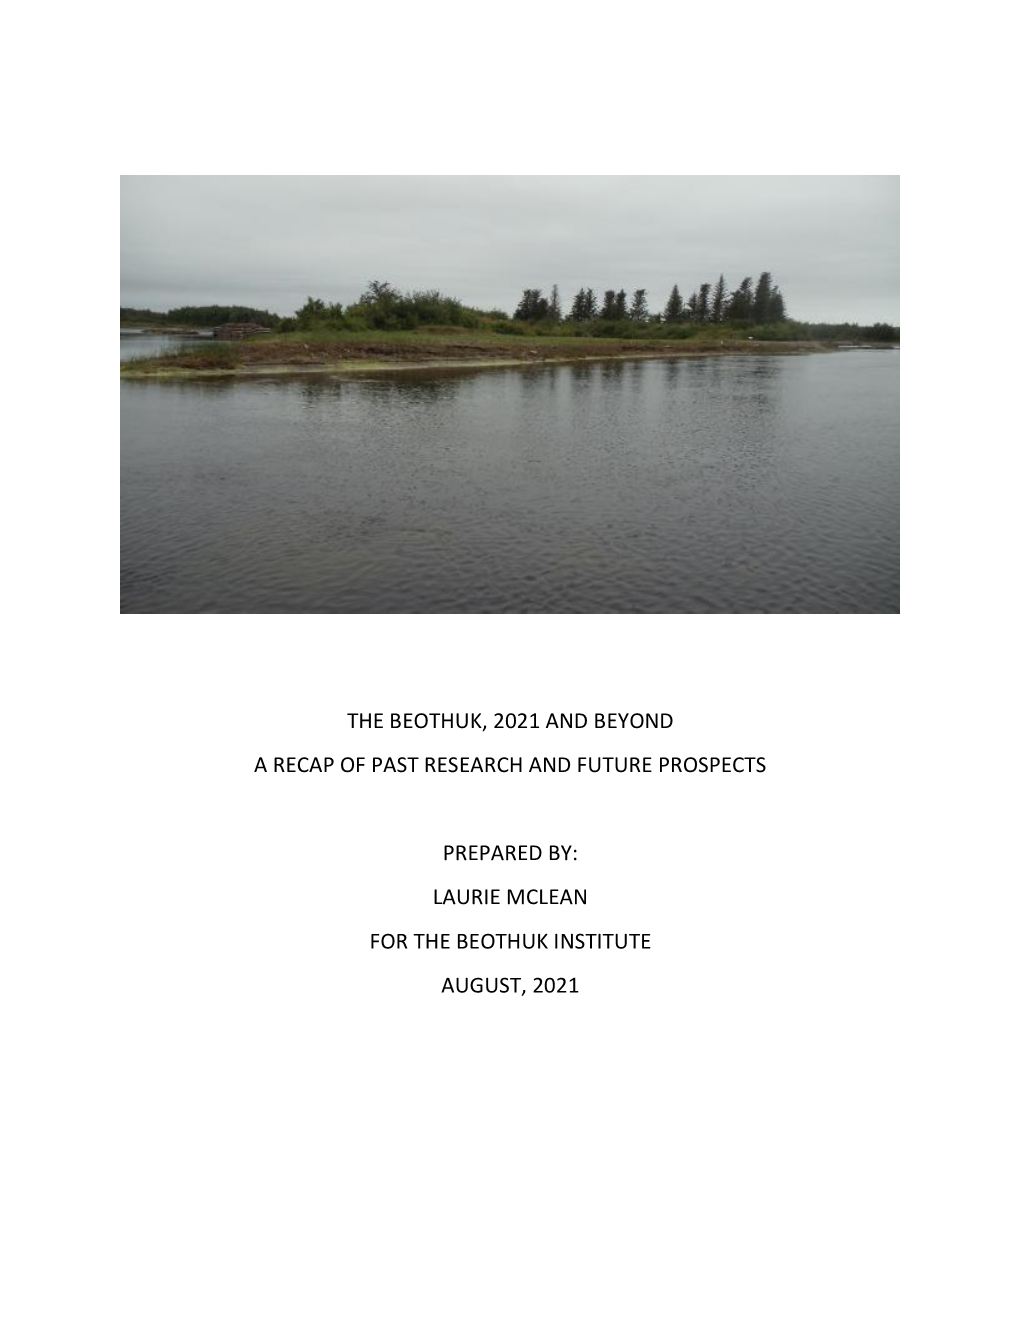 The Beothuk, 2021 and Beyond a Recap of Past Research and Future Prospects